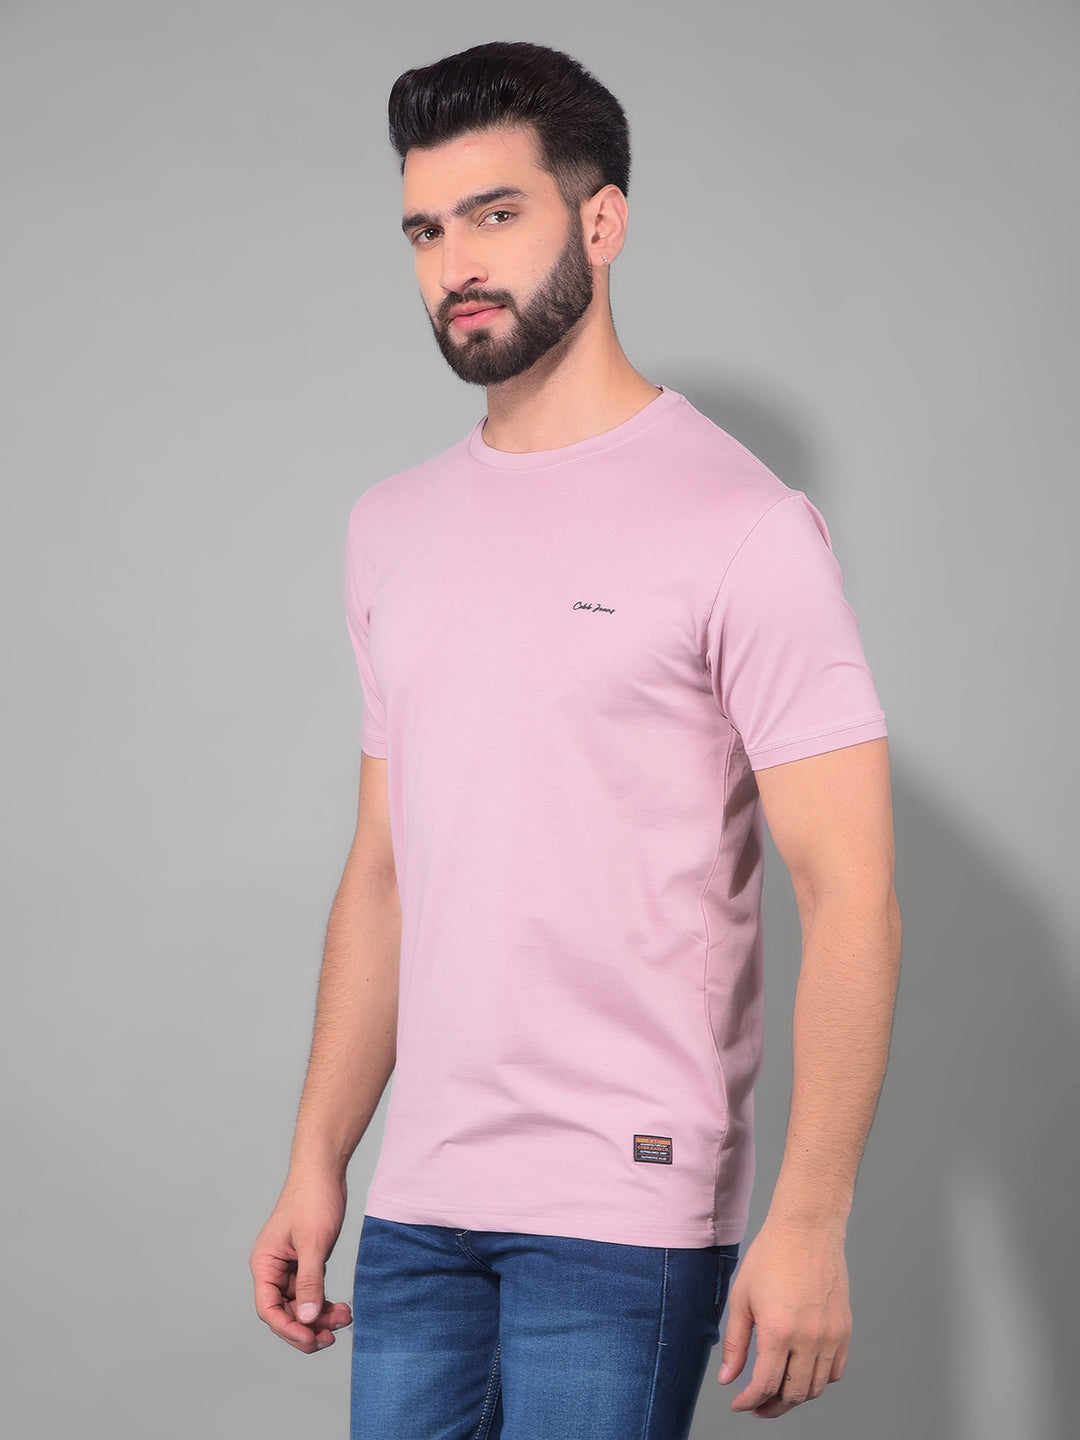 cobb solid crepe pink round neck t-shirt